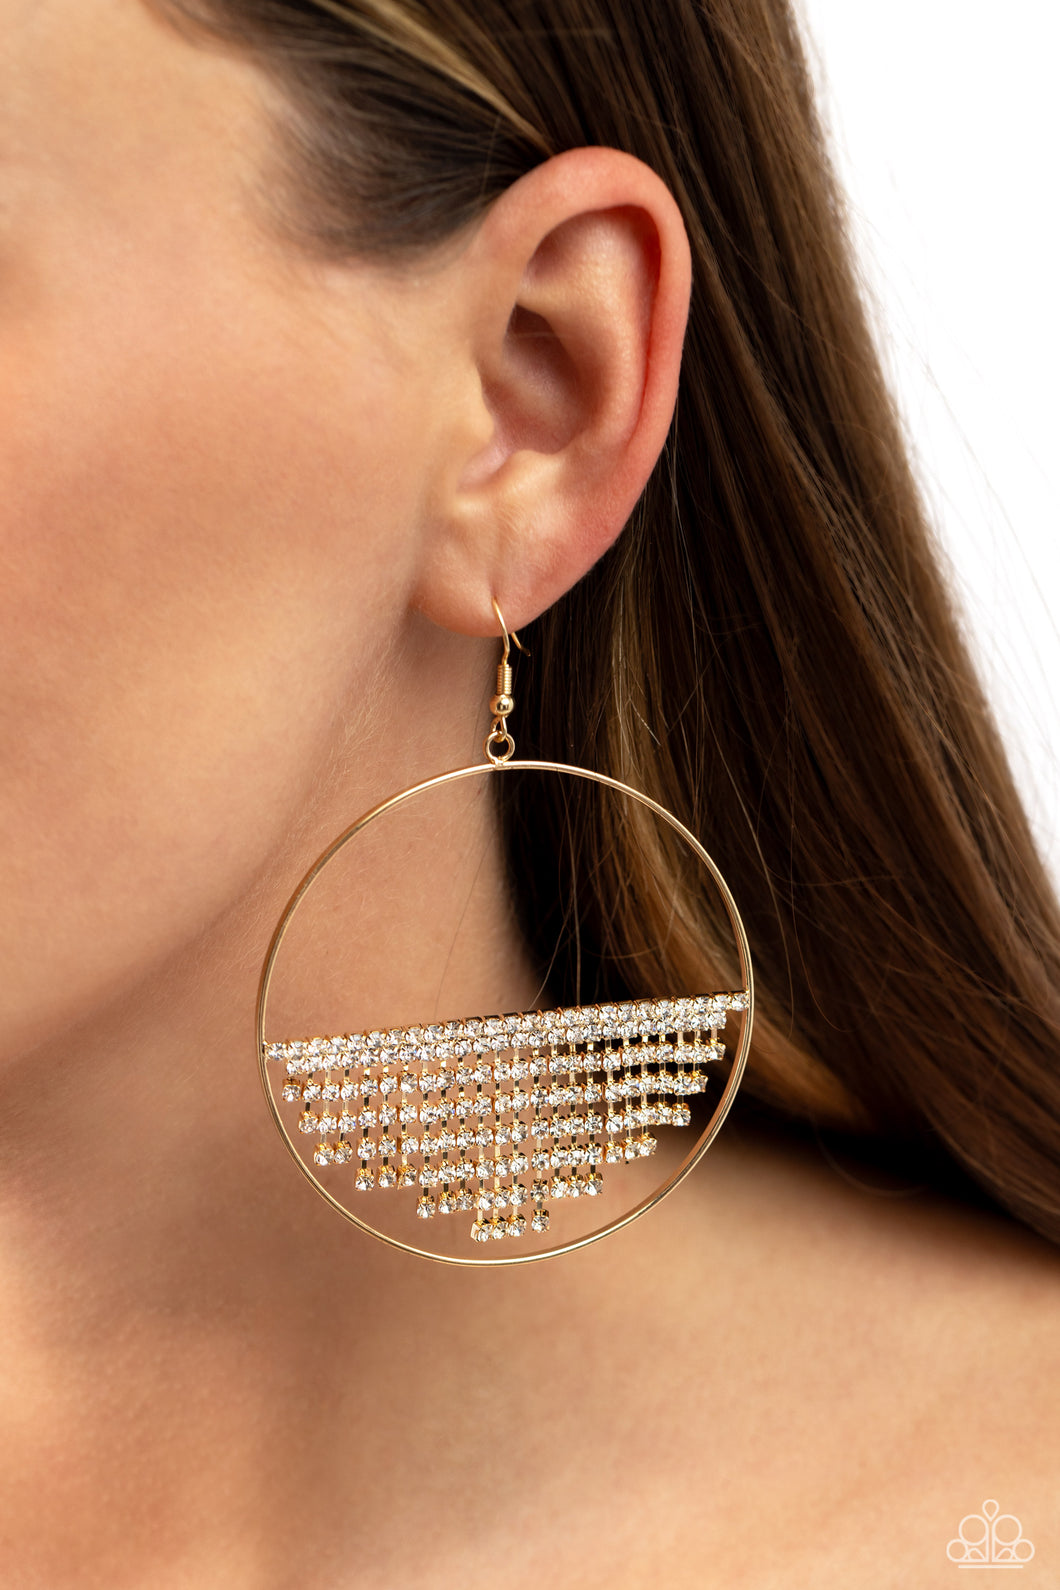 A curtain of white rhinestones is stretched between the edges of a skinny, oversized gold hoop, creating a shimmering display. The rhinestones taper towards the center as they sway and cascade, adding sparkly movement for a fierce industrial finish. Earring attaches to a standard fishhook fitting.  Sold as one pair of earrings.